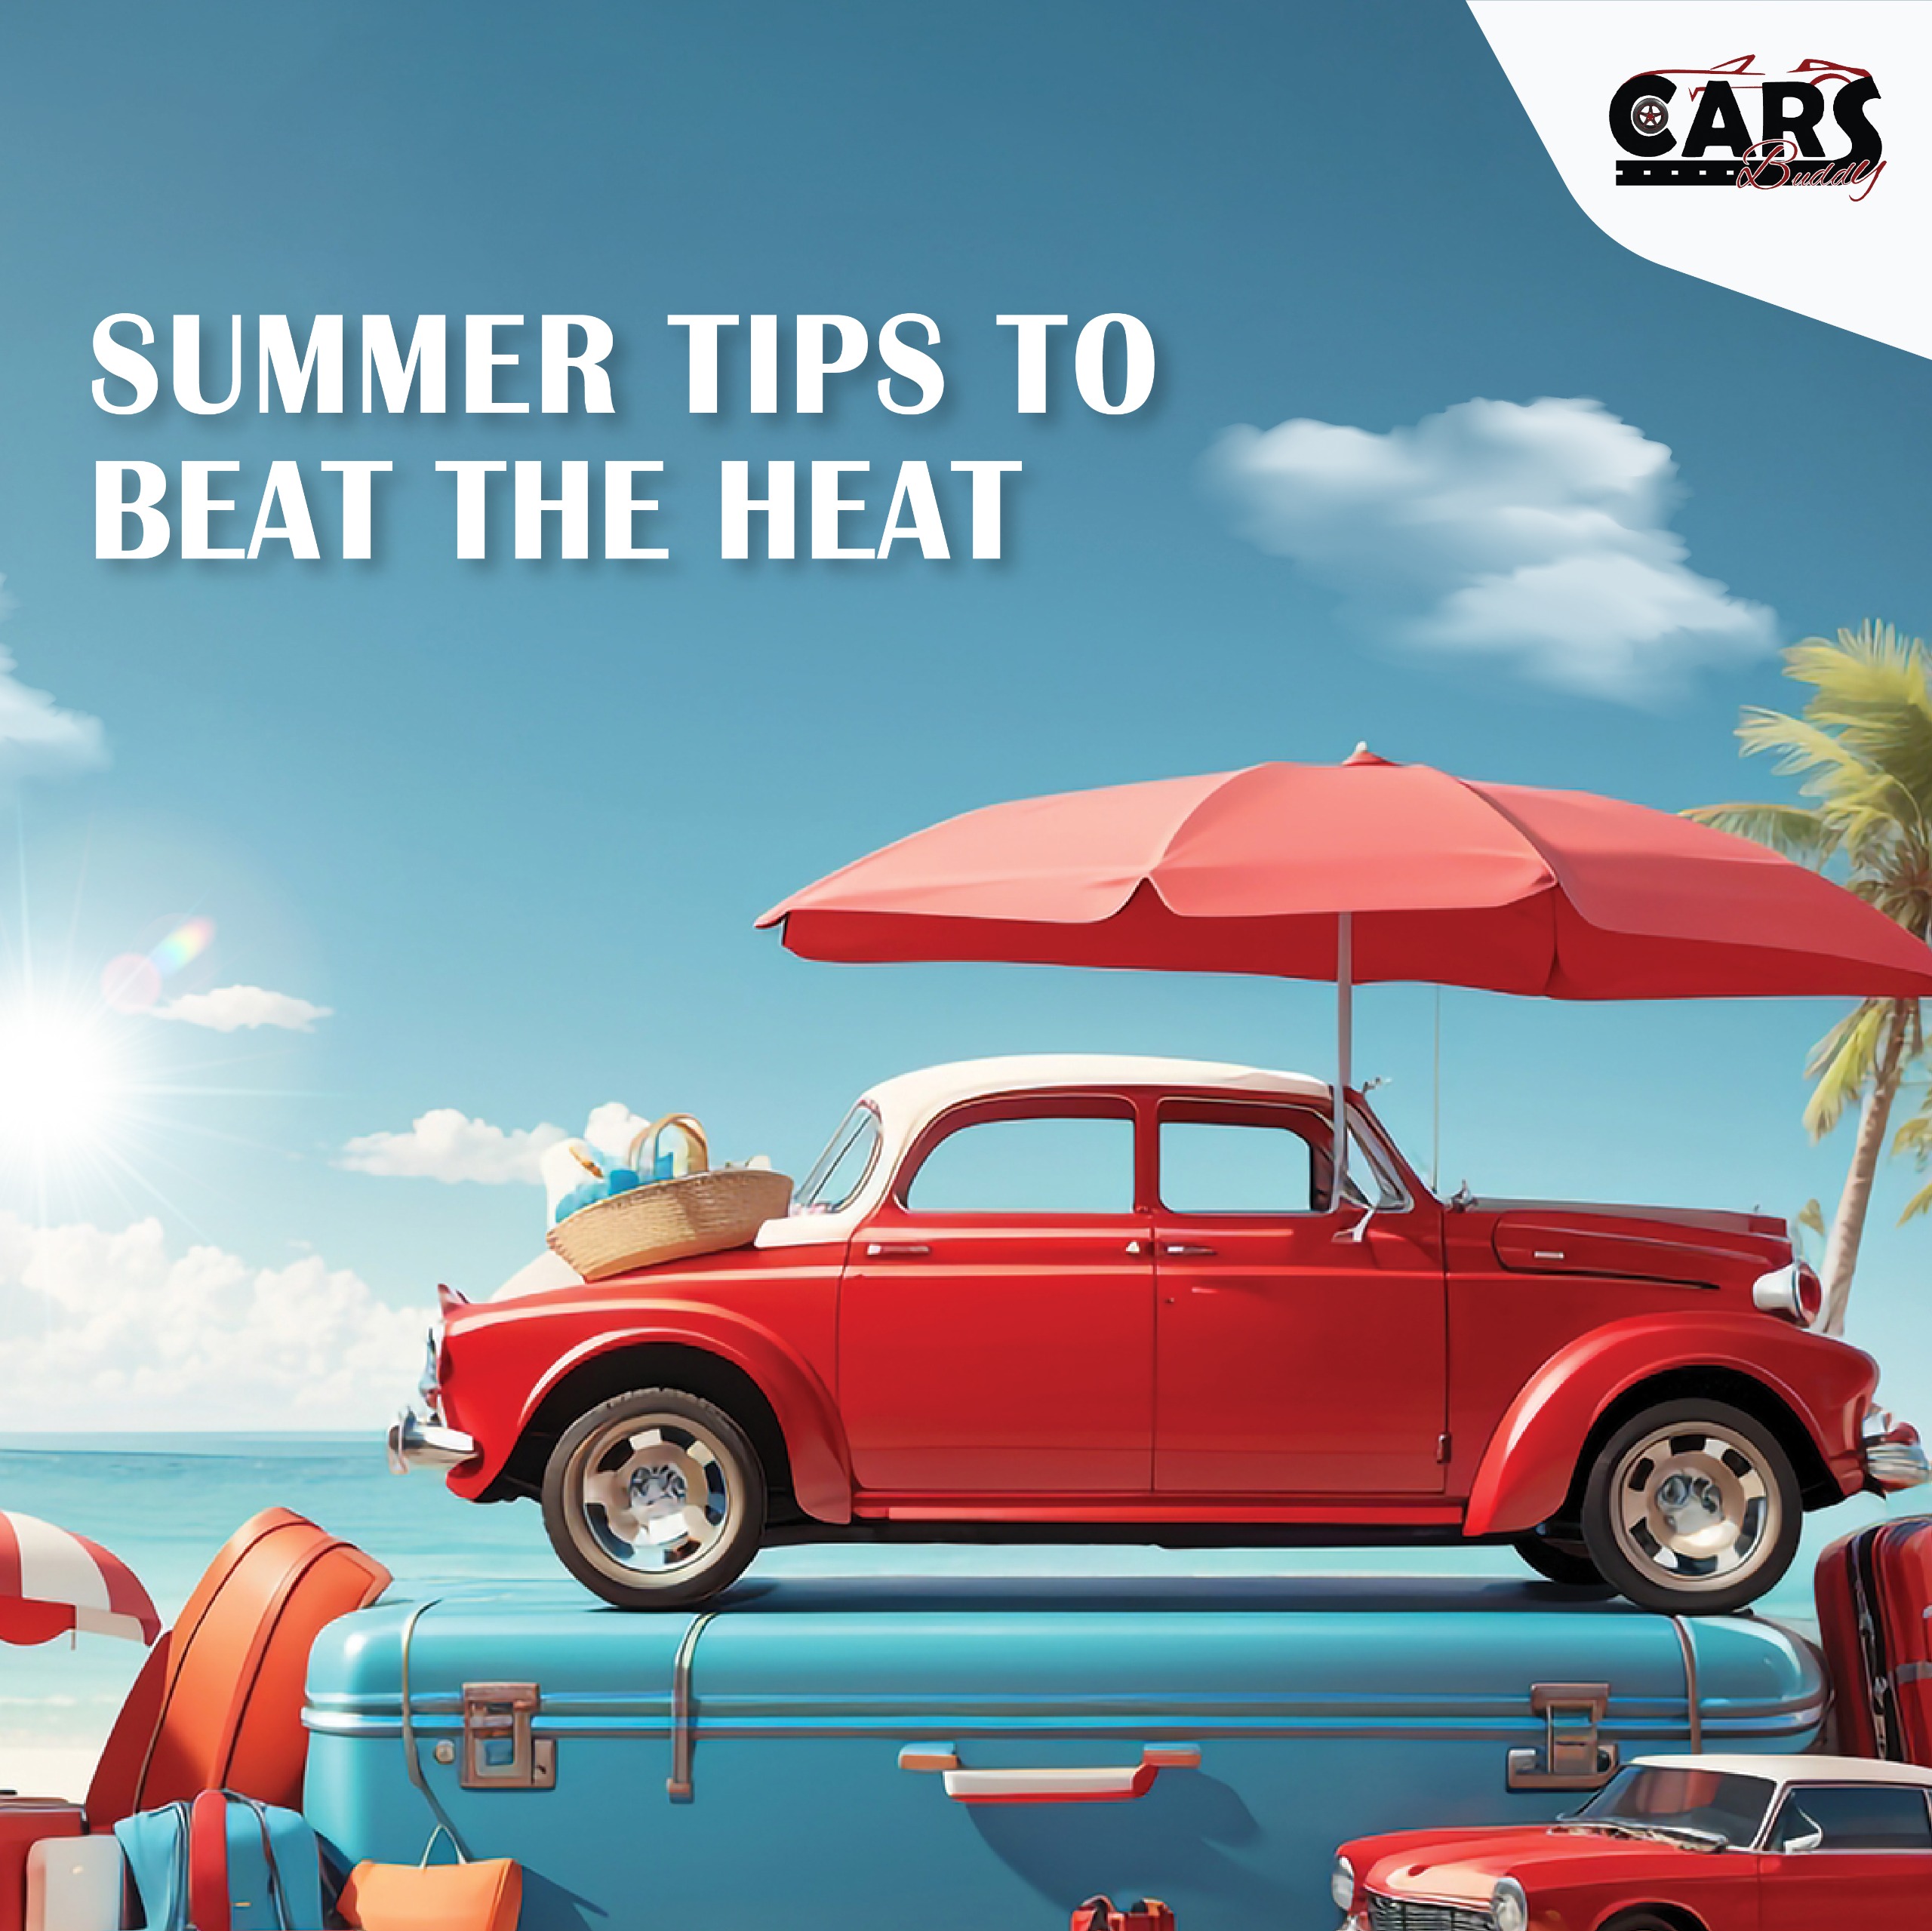 Summer Tips to Beat the Heat